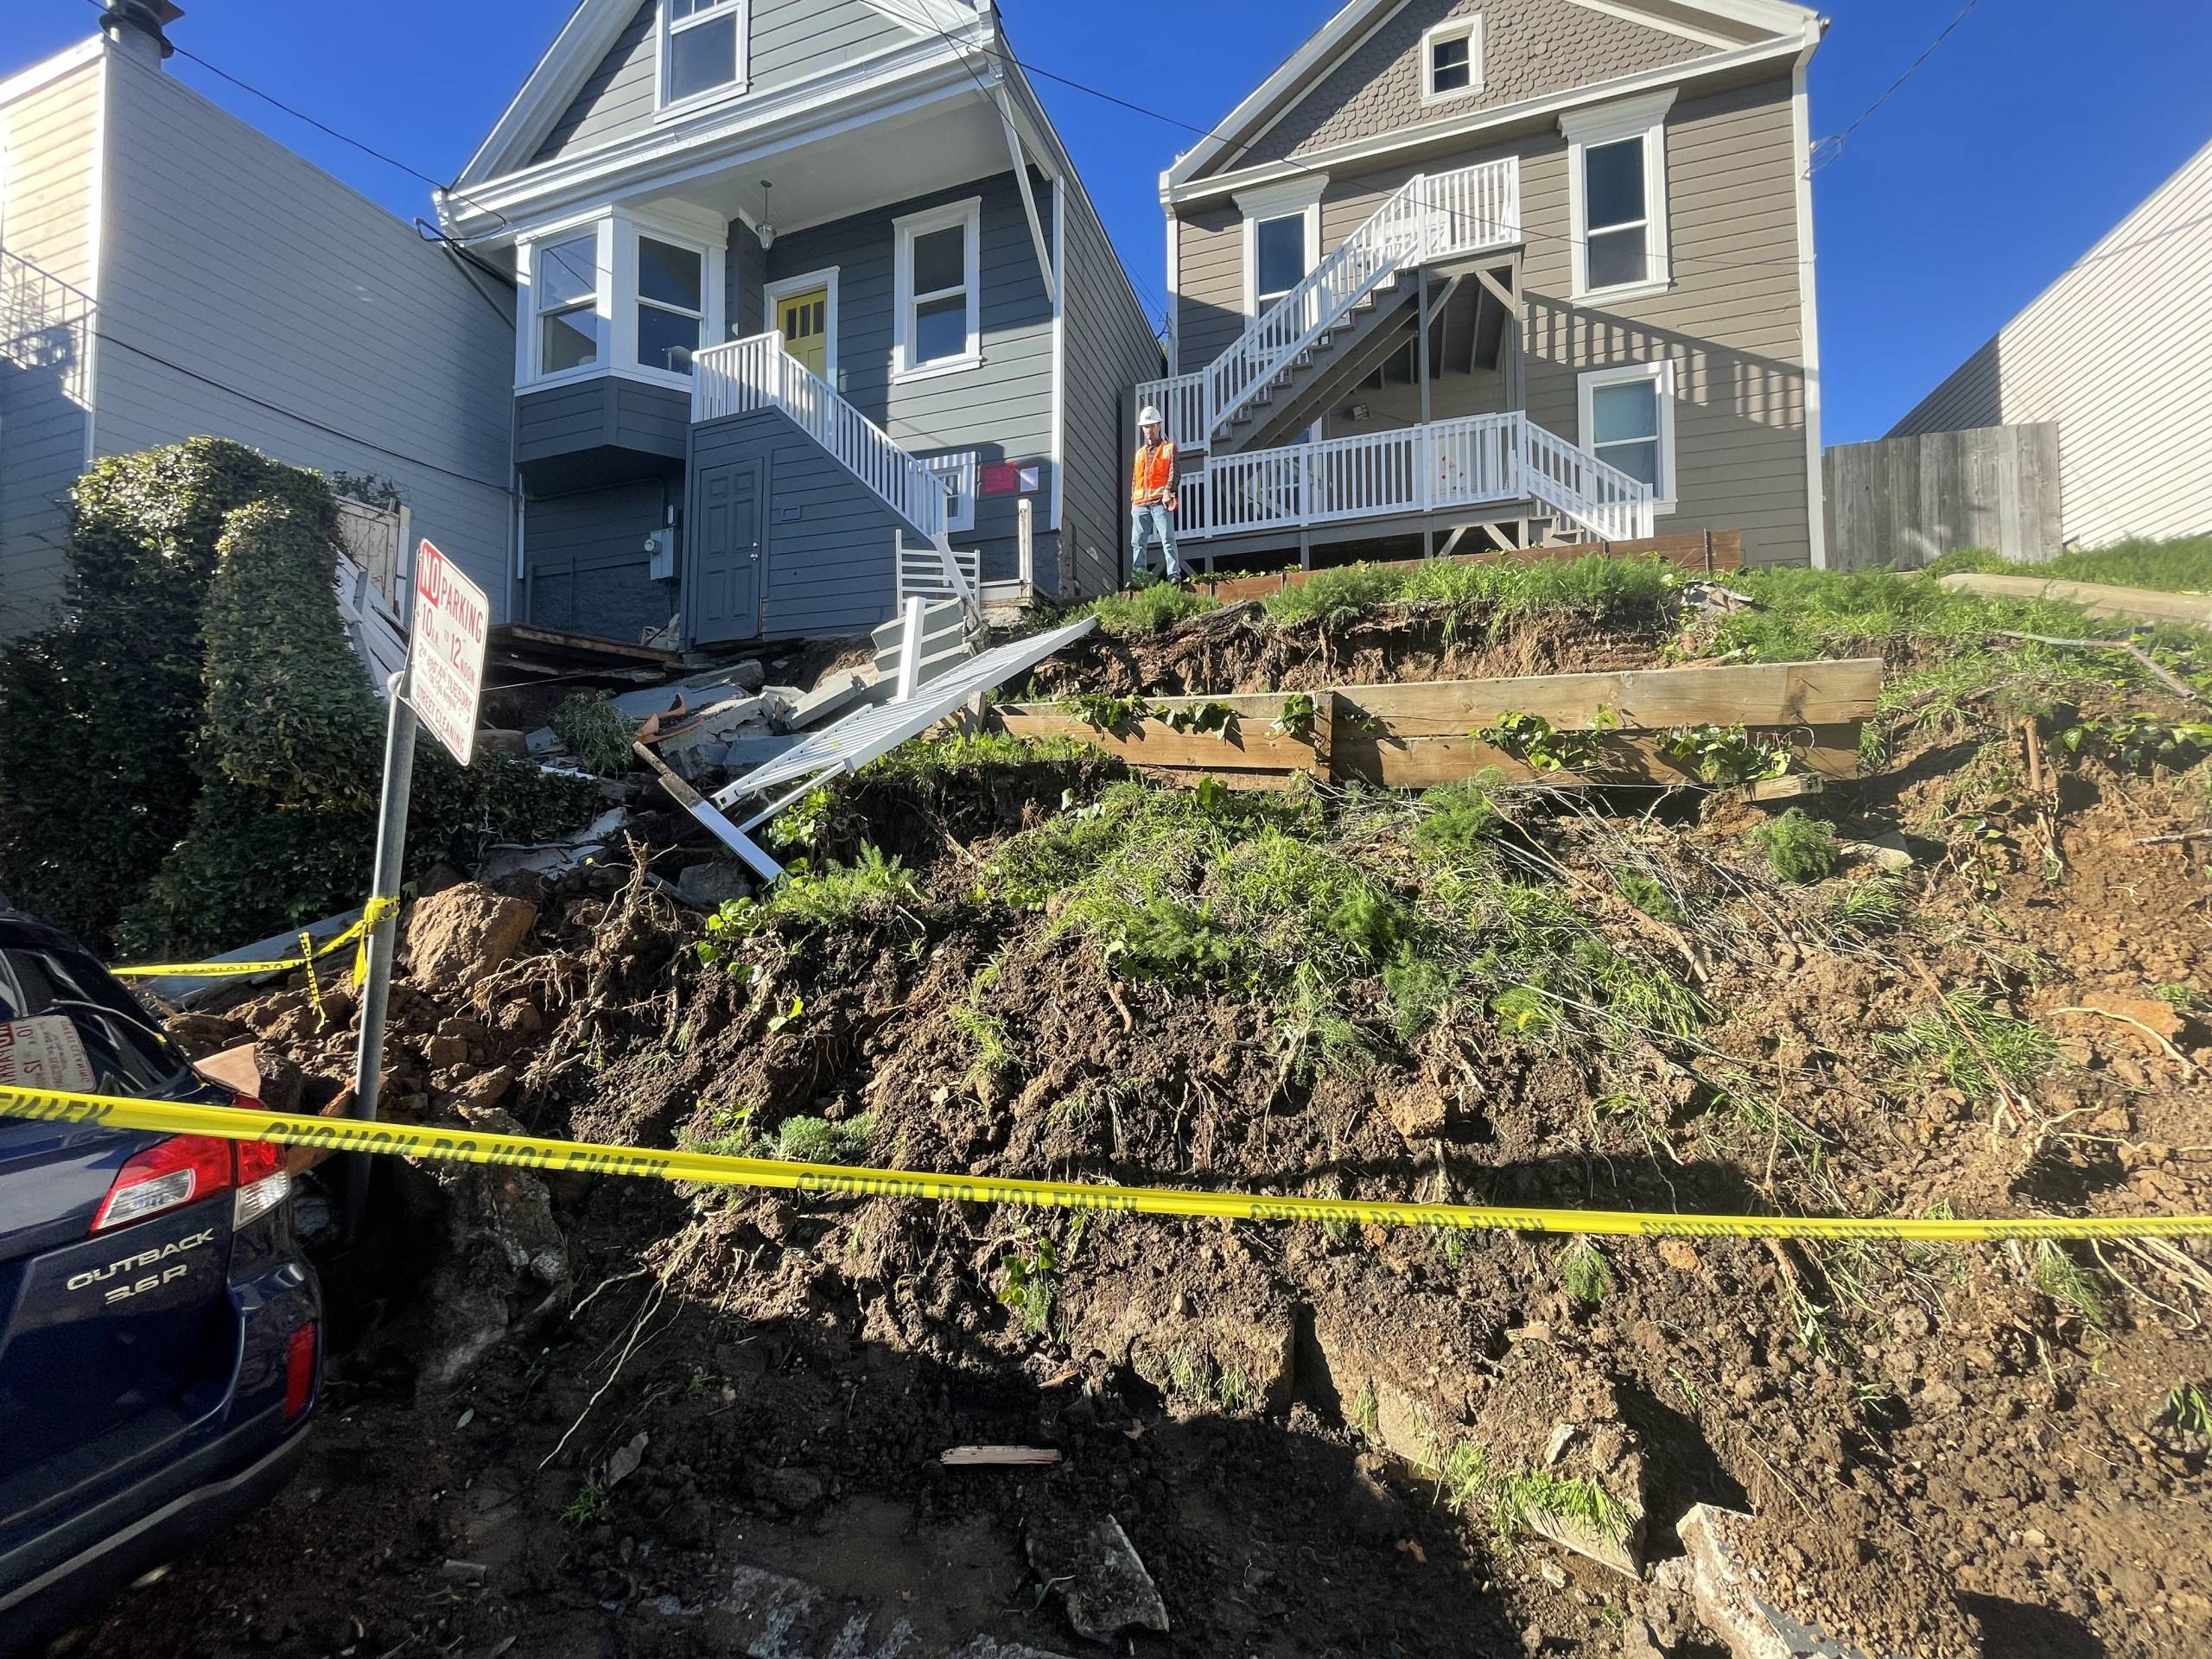 A Subaru Outback is buried beneath rubble and dirt from a landslide. One worker stands at the top of a hill with two houses behind him. Yellow caution tape blocks off the perimeter.